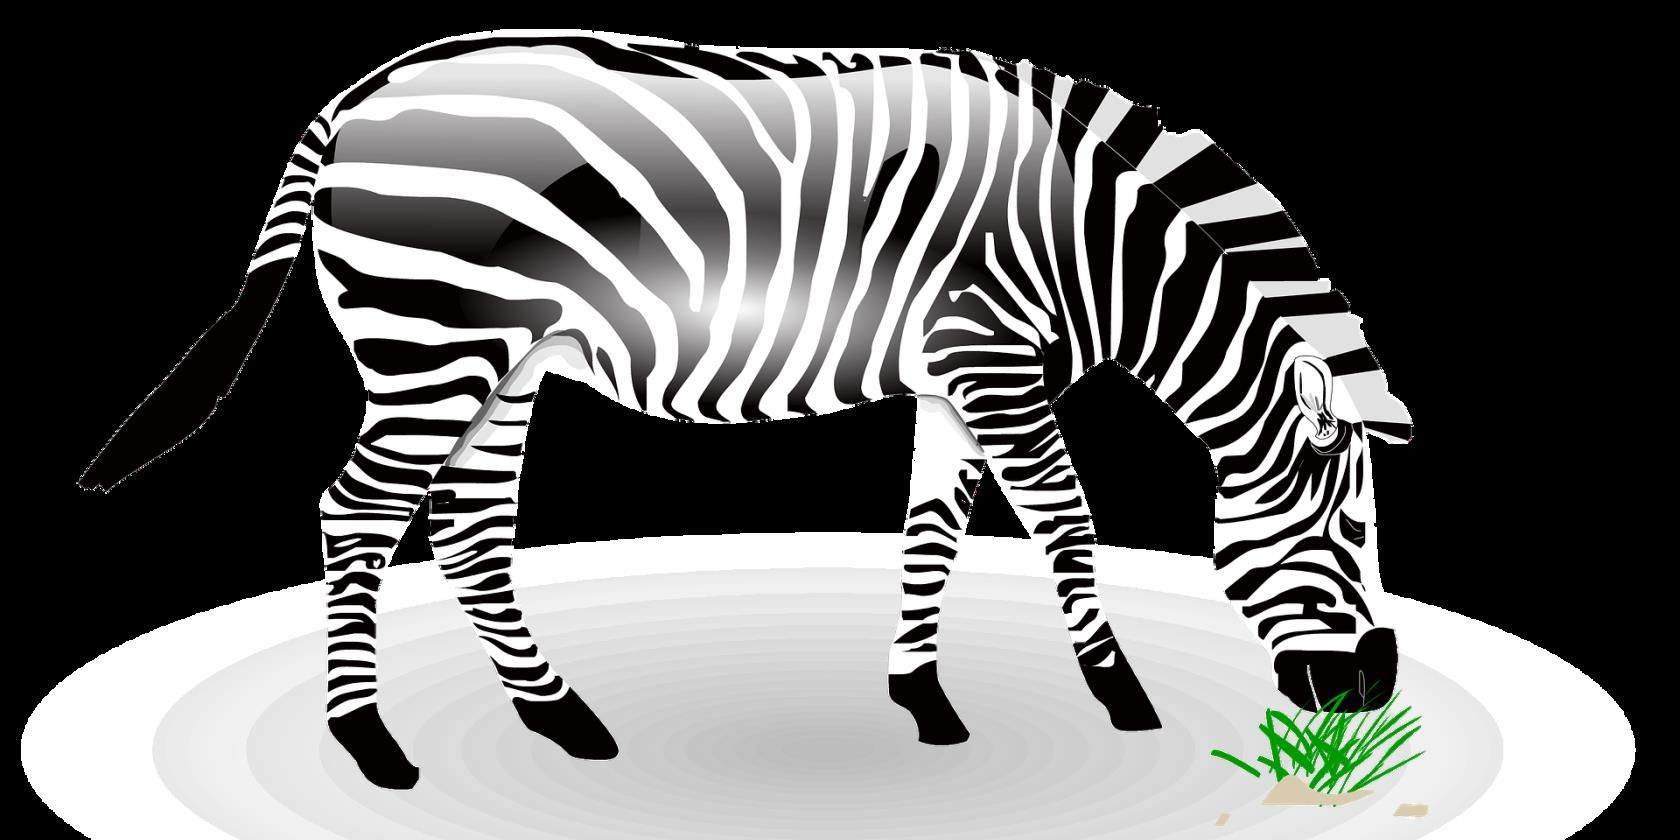 How to View Google's 3D Animals and Go on a Virtual Safari